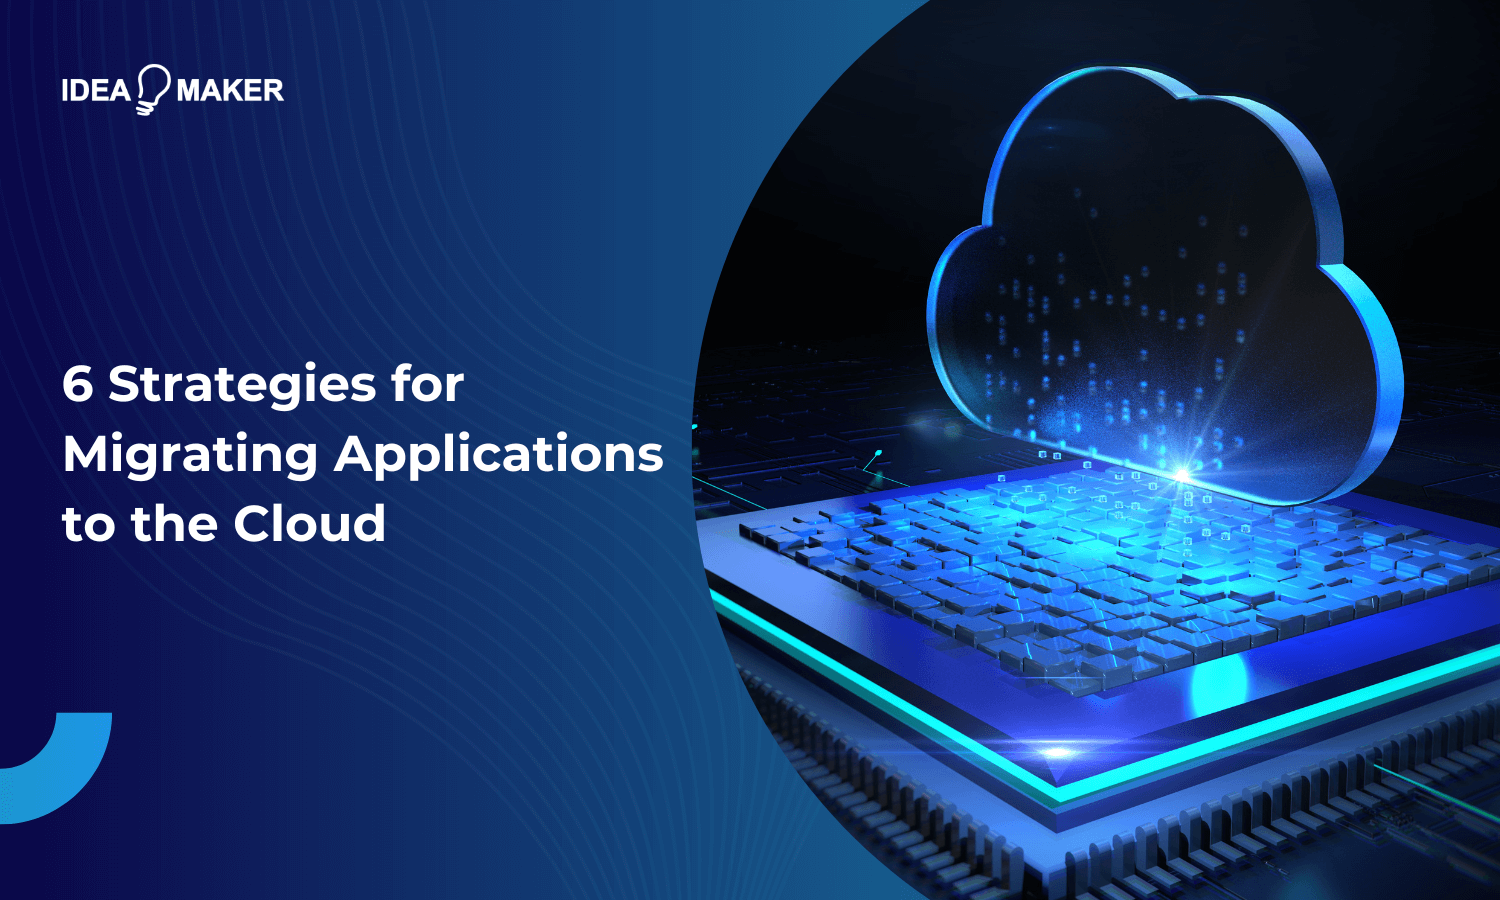 6 Strategies for Migrating Applications to the Cloud